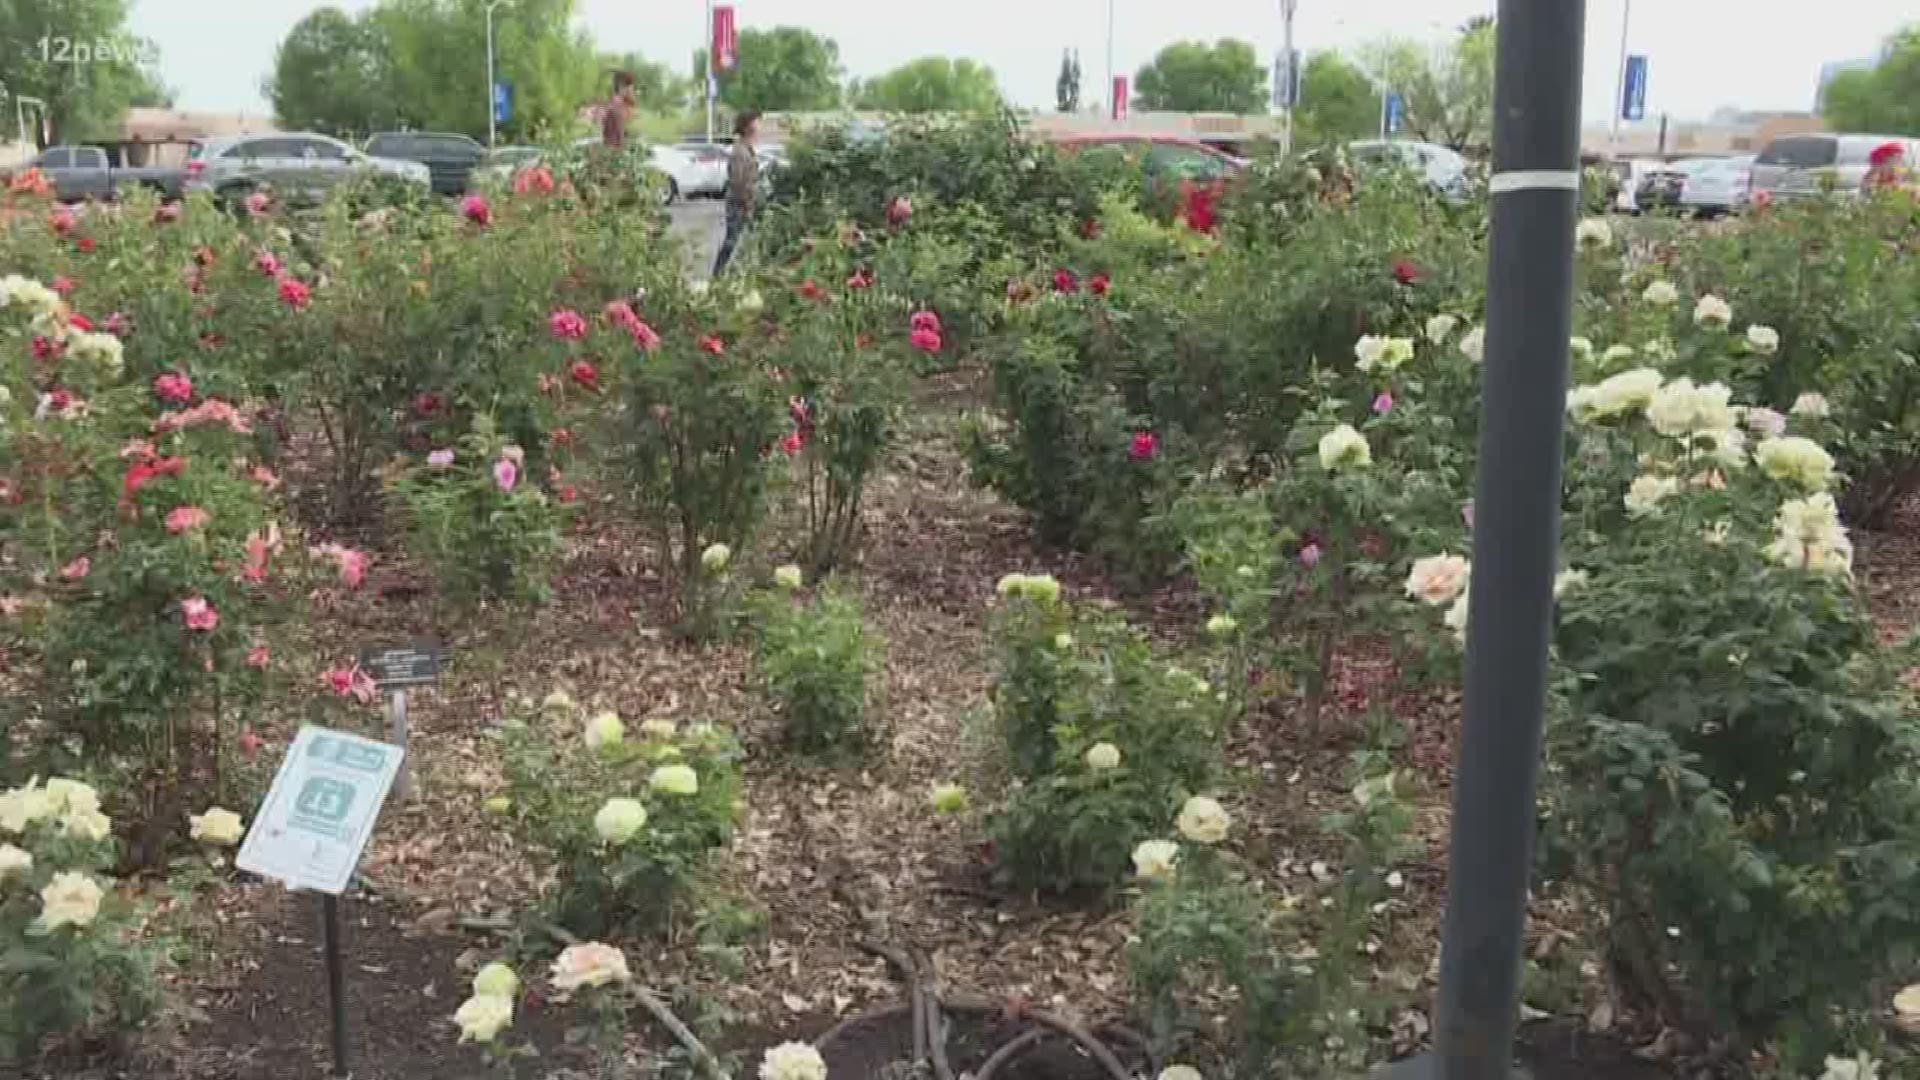 The Rose Garden at Mesa Community College is the home of nearly 9,000 rose bushes.